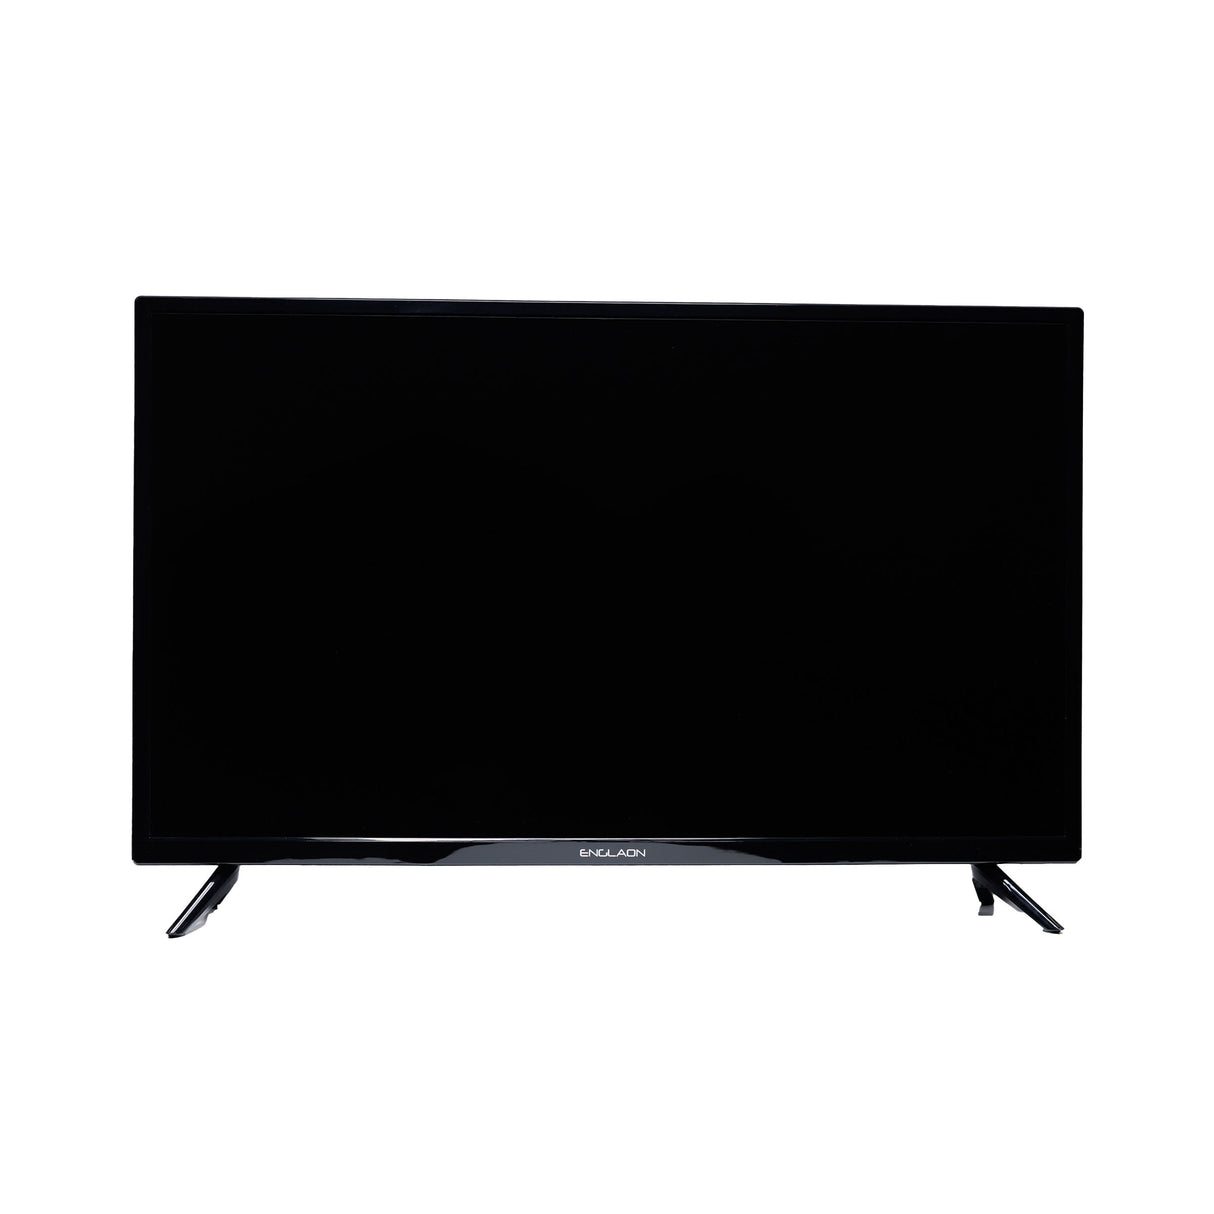 ENGLAON 32″ Full HD Android Smart 12V TV with Built-in DVD player & Chromecast